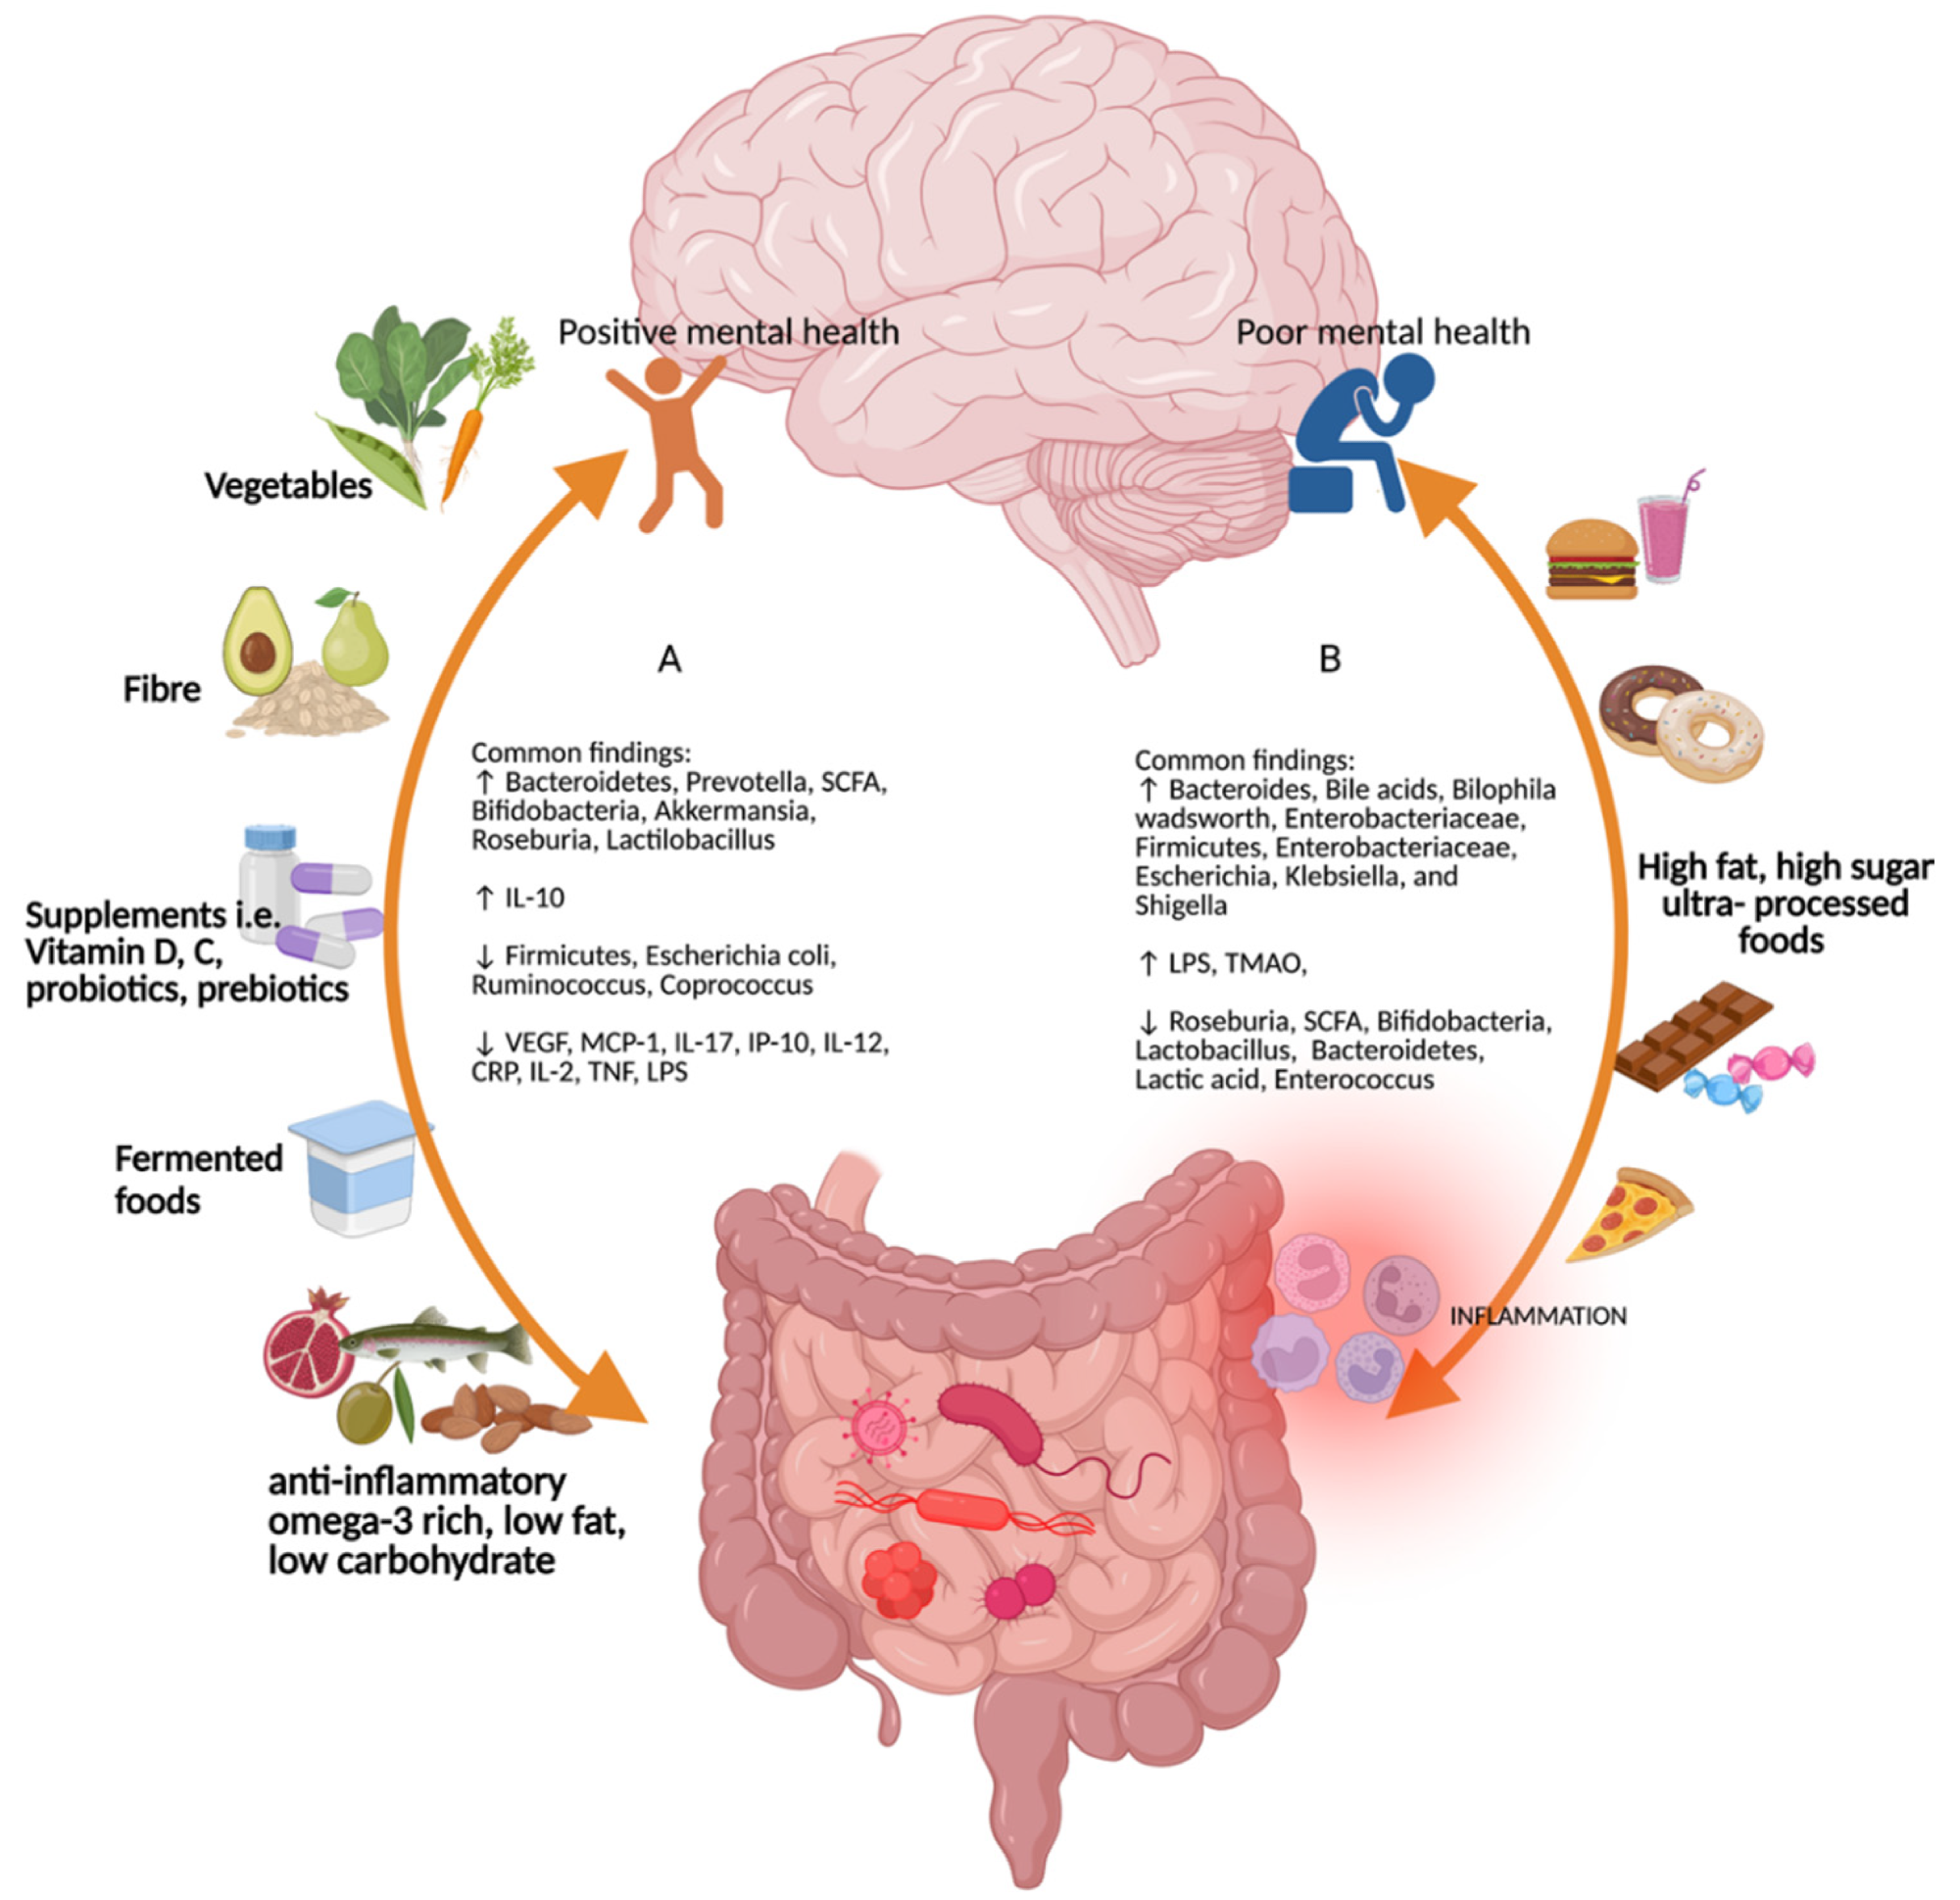 Common findings for different types of bowel-brain-microbiome-focused diets.  (A) Vegetables, fiber, micronutrients such as vitamins D and C, probiotics and prebiotics, fermented foods, rich anti-inflammatory omega-3s, low fat and low carbohydrate foods promote and increase positive mental health.  Bacteroidetes, Prevotella, short-chain fatty acids, Bifodobacteria, Akkermansia, Roseburia, Lactilobacillus and interleukin (IL) -10, and Firmicutes, Escherichia coli, Ruminococcus, Coprococcus, vascular endothelial growth factor 1, reduced protein interferon  gamma-induced protein 10, IL-17, IL-12, c-reactive protein, IL-2, tumor necrosis factor, and lipopolysaccharide.  (B) High-fat, high-sugar, and ultra-processed foods increase Bacteroides, Bile Acids, Bilophila wadsworth, Enterobacteriaceae, Firmicutes, Enterobacteriaceae, Escherichia, Klebsiella, and Shigella.  Image created with Biorender (acquired April 29, 2022).